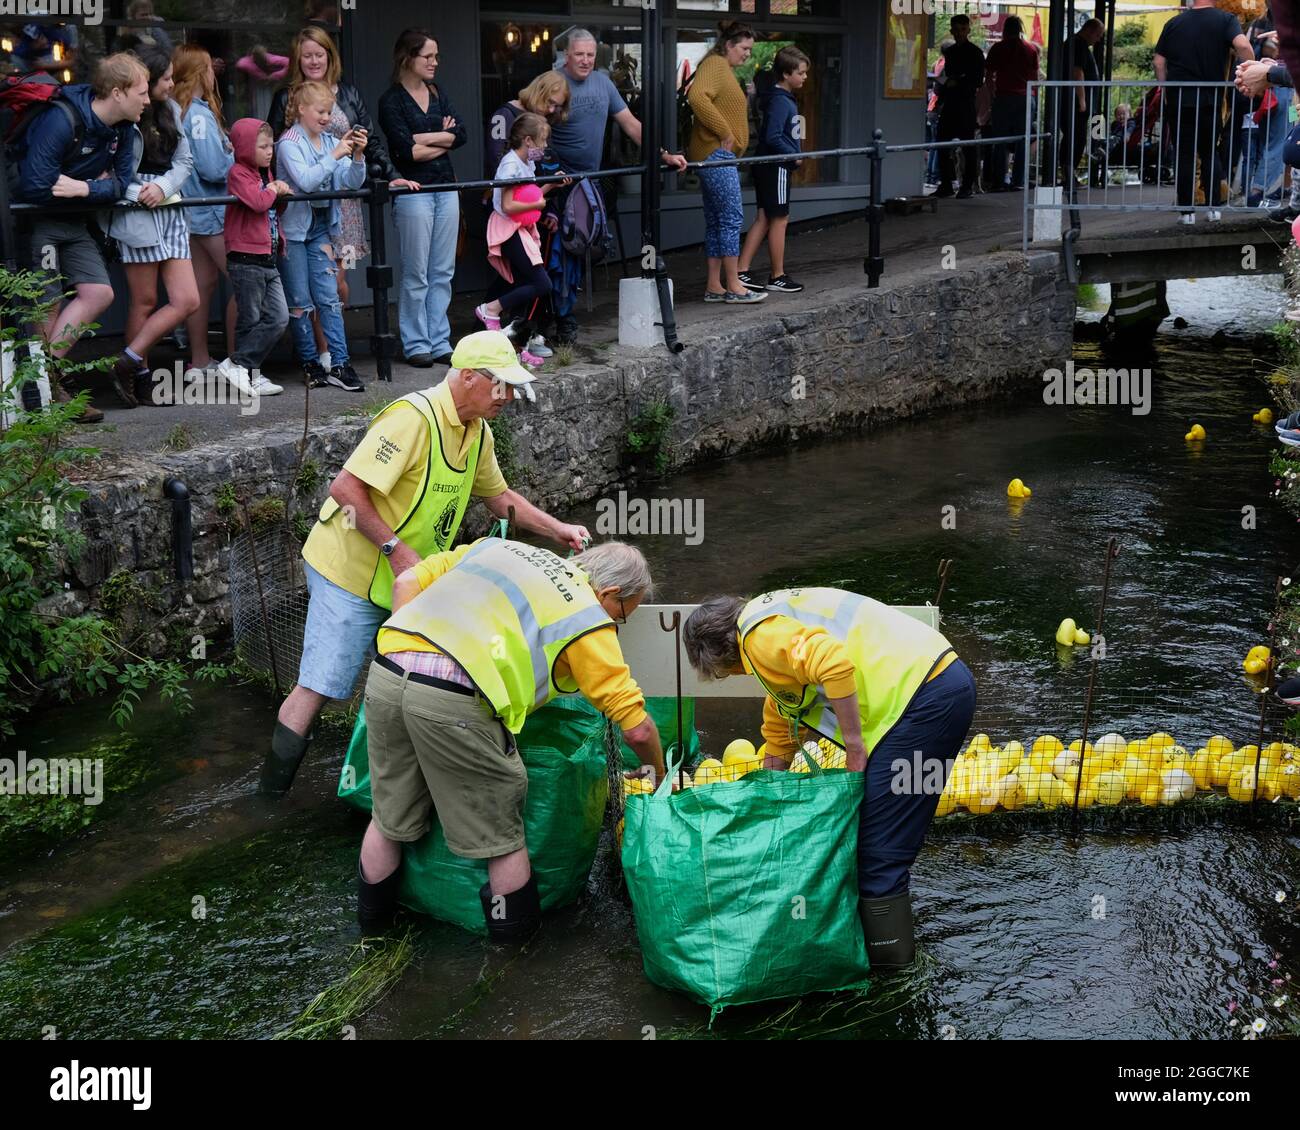 August 2021 - The village Lions club tidy up after their aunual duck race in the gorge Cheddar Somerset, UK. Stock Photo